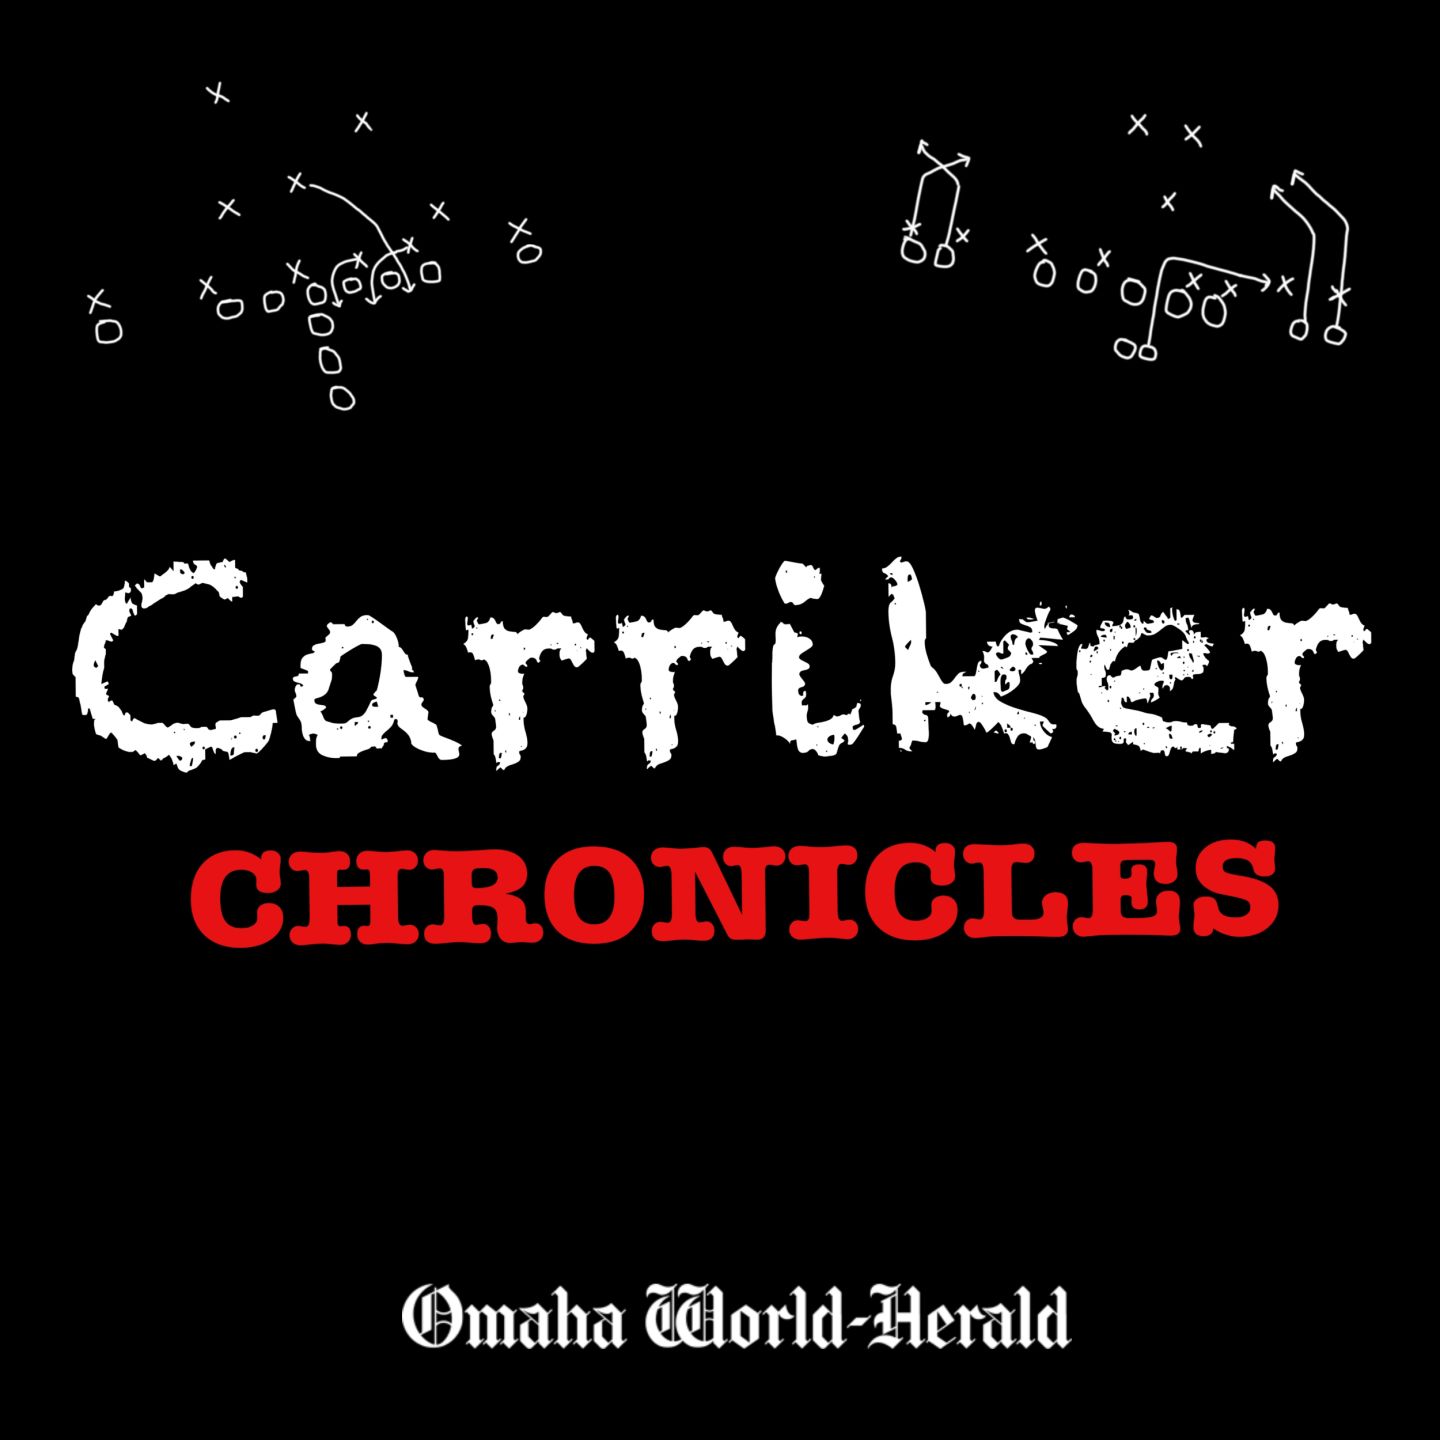 Carriker Chronicles: What can we expect from Nebraska's defensive line